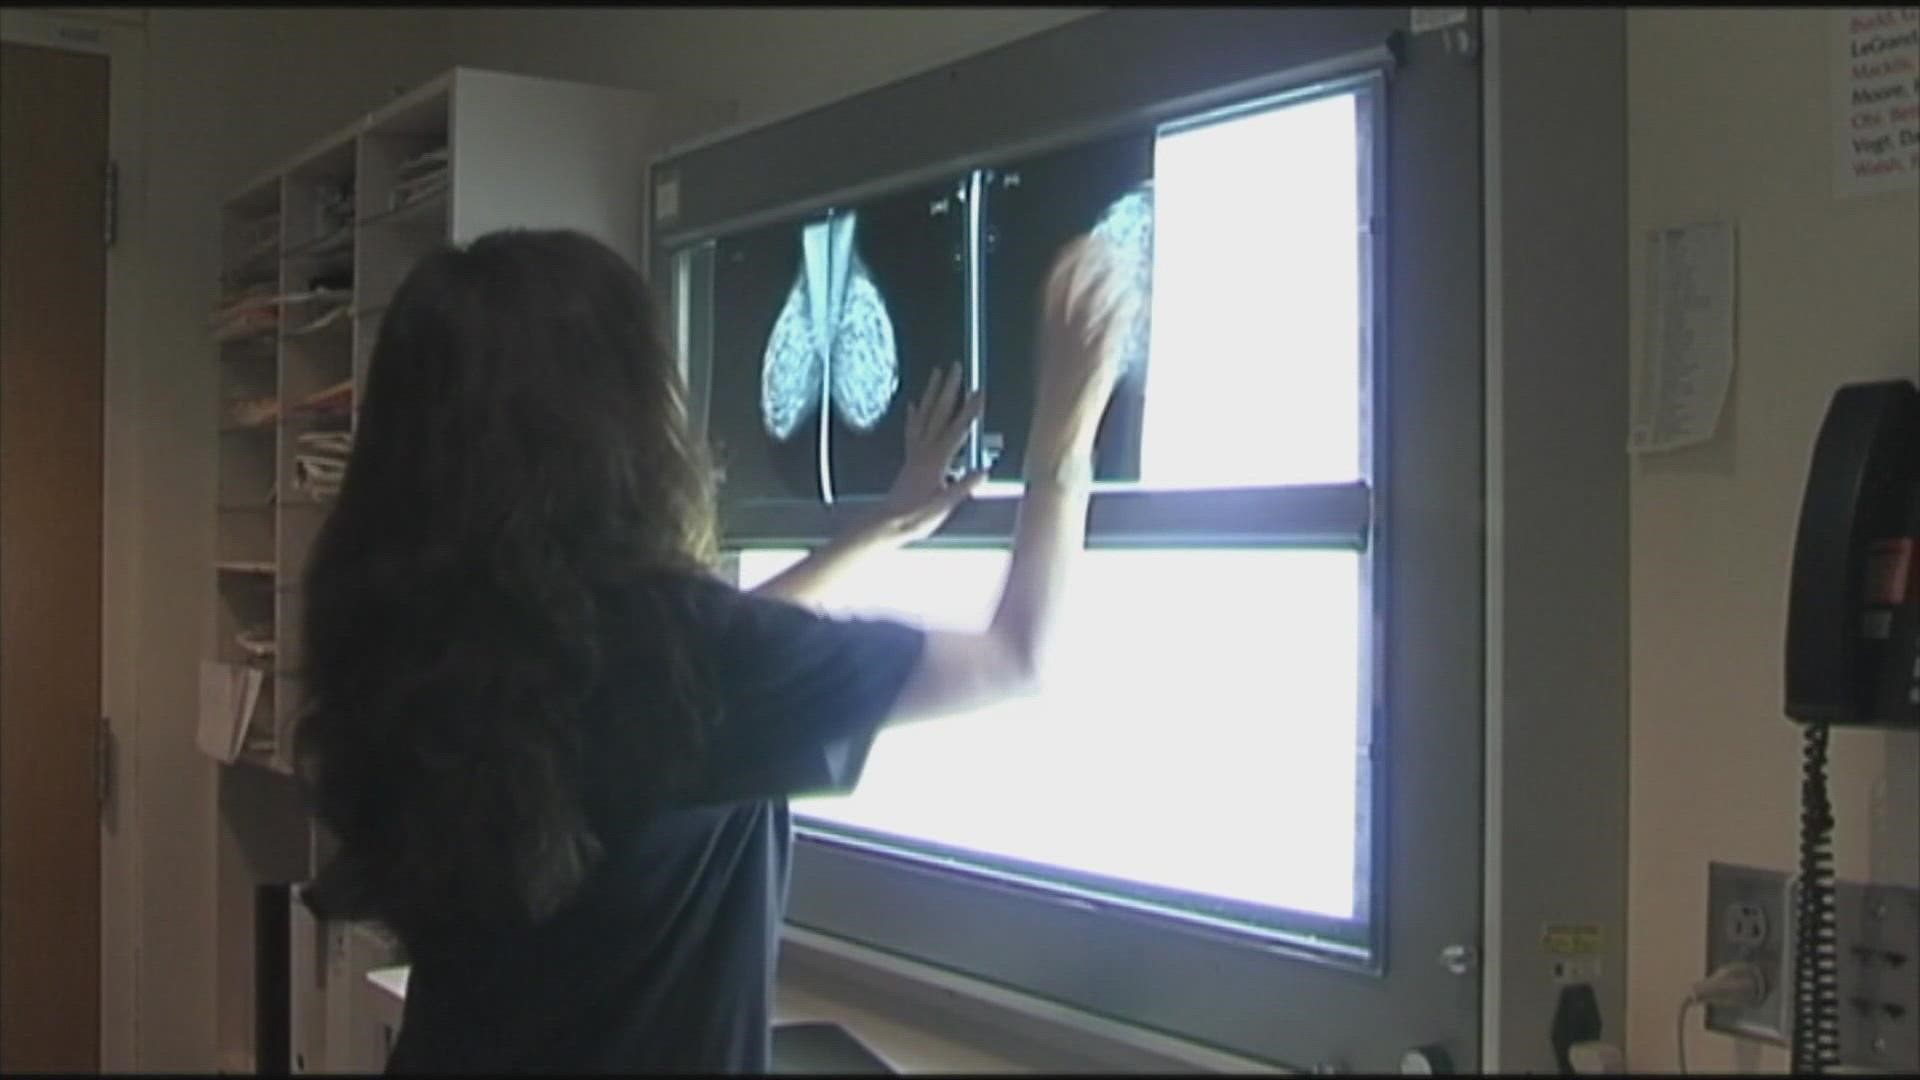 3News’ Danielle Wiggins shared how self-exams and getting her mammogram as soon as she turned 40 detected breast cancer.